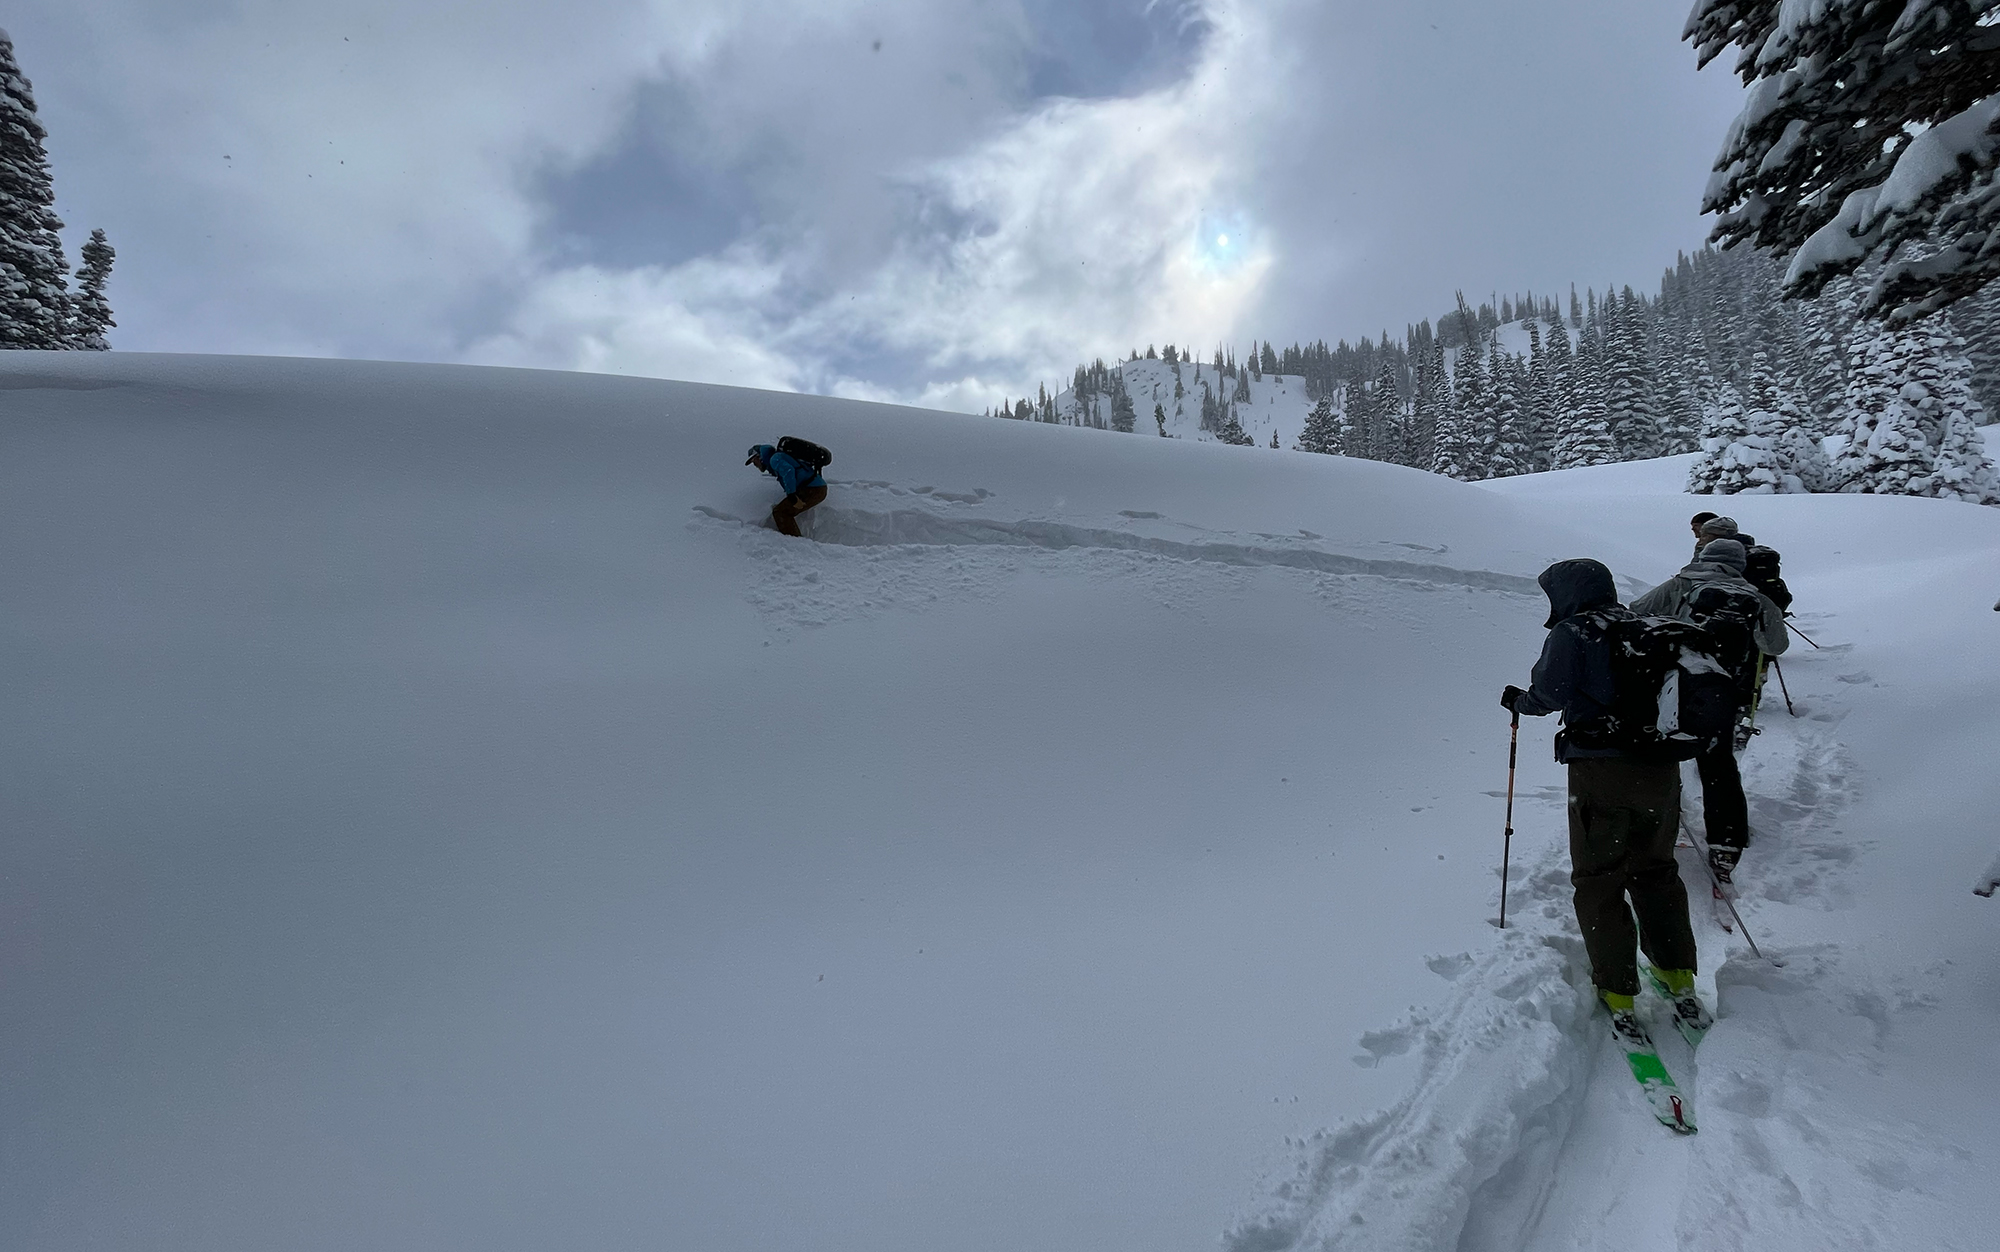 Our instructor attempts to trigger an avalanche on a test slope, a small piece of inconsequential terrain that is indicative of where we are trying to ski.